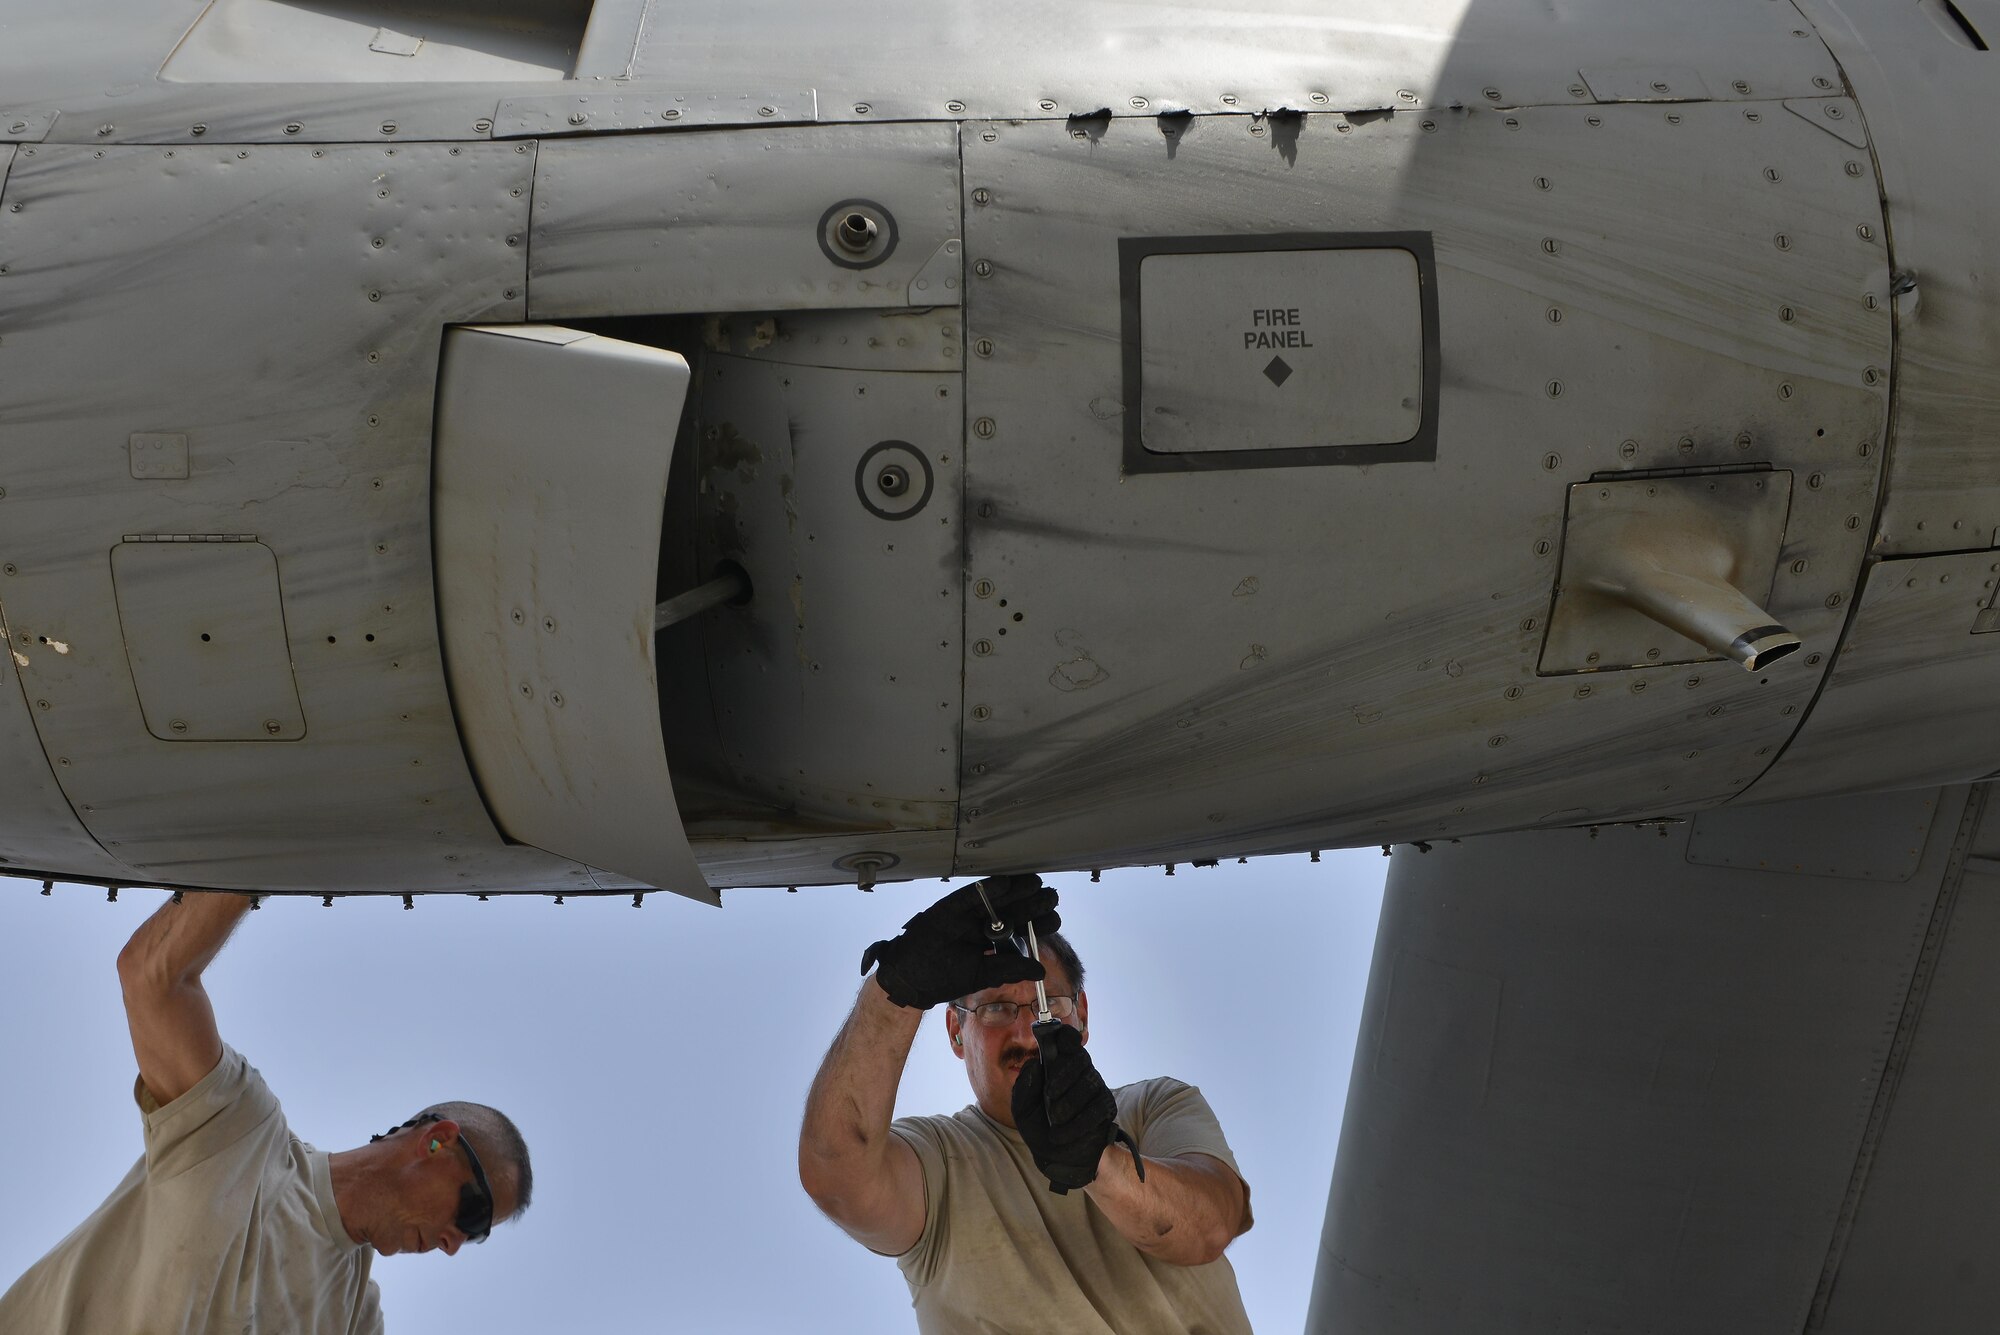 Staff Sgt. Eugene Wilson and Master Sgt. Daniel Gothe, 379th Expeditionary Aircraft Maintenance Squadron, 746th Expeditionary Aircraft Maintenance Unit, remove the bolts of a C-130 Hercules engine panel to make internal inspections September 9, 2015 at Al Udeid Air Base, Qatar. The 746th AMU airmen are responsible for ensuring aircraft are maintained to exact standards to support Operation Inherent Resolve. Wilson and Gothe are deployed members of the 911th Airlift Wing, Pittsburgh International Airport Air Reserve Station, Pa. (U.S. Air Force photo/Staff Sgt. Alexandre Montes)  